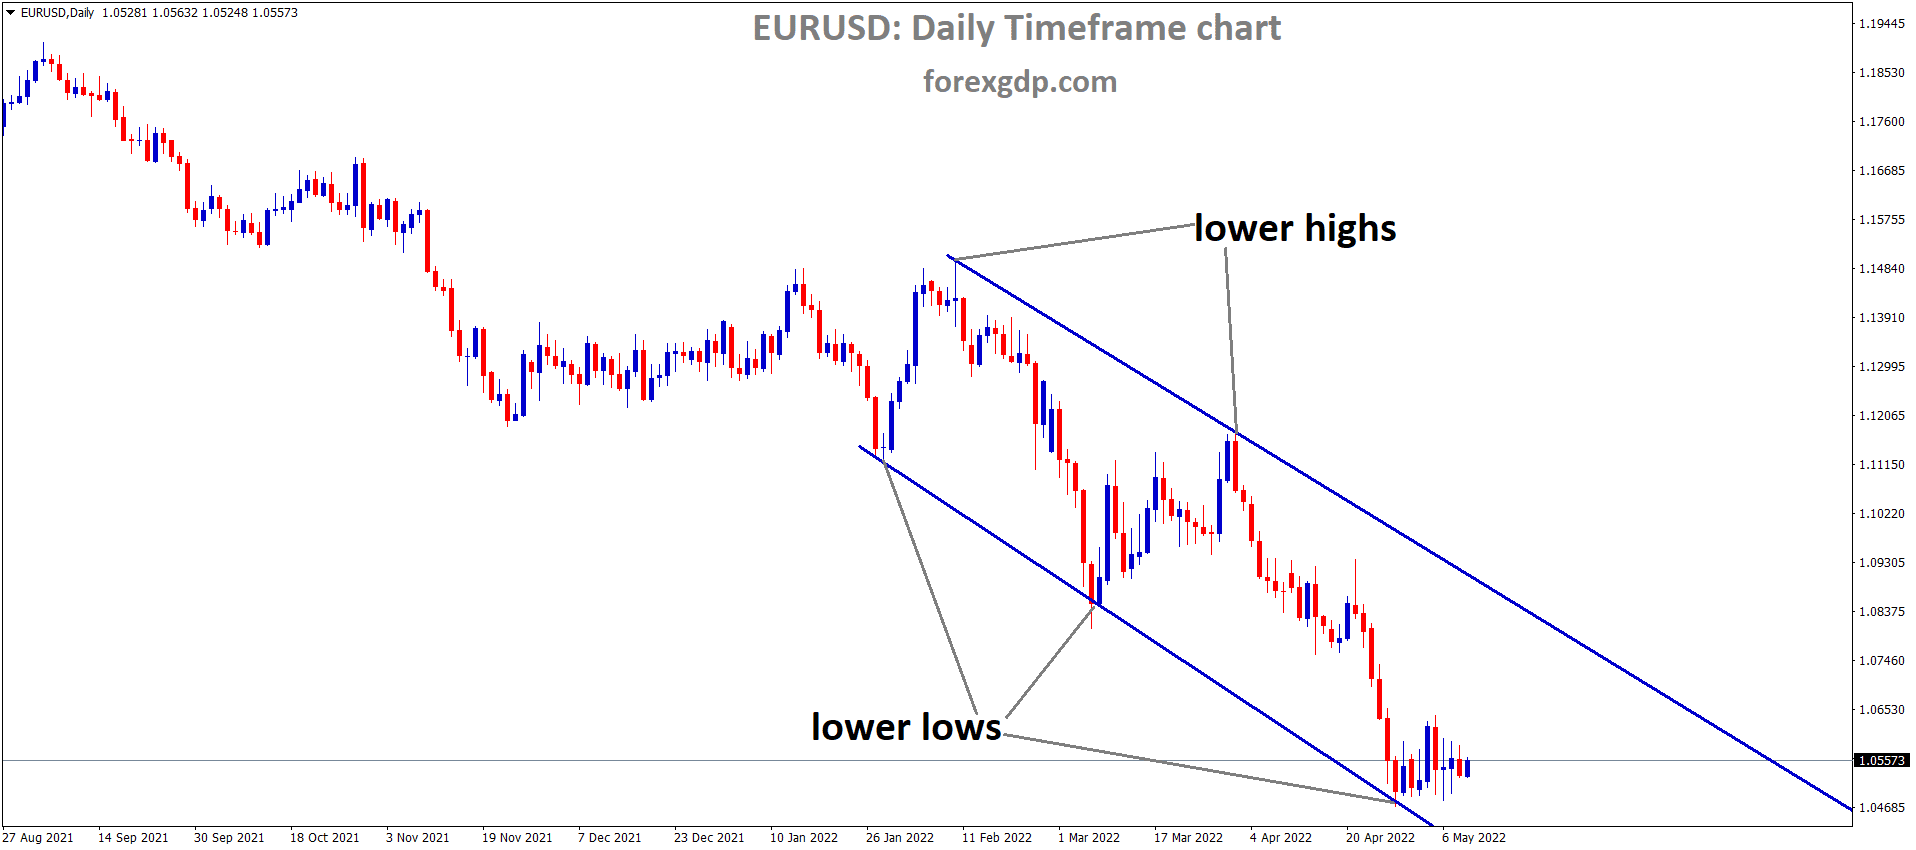 EURUSD Daily Time Frame Analysis Market is moving in the Descending channel and the Market has consolidated at the Lower low area of the Channel